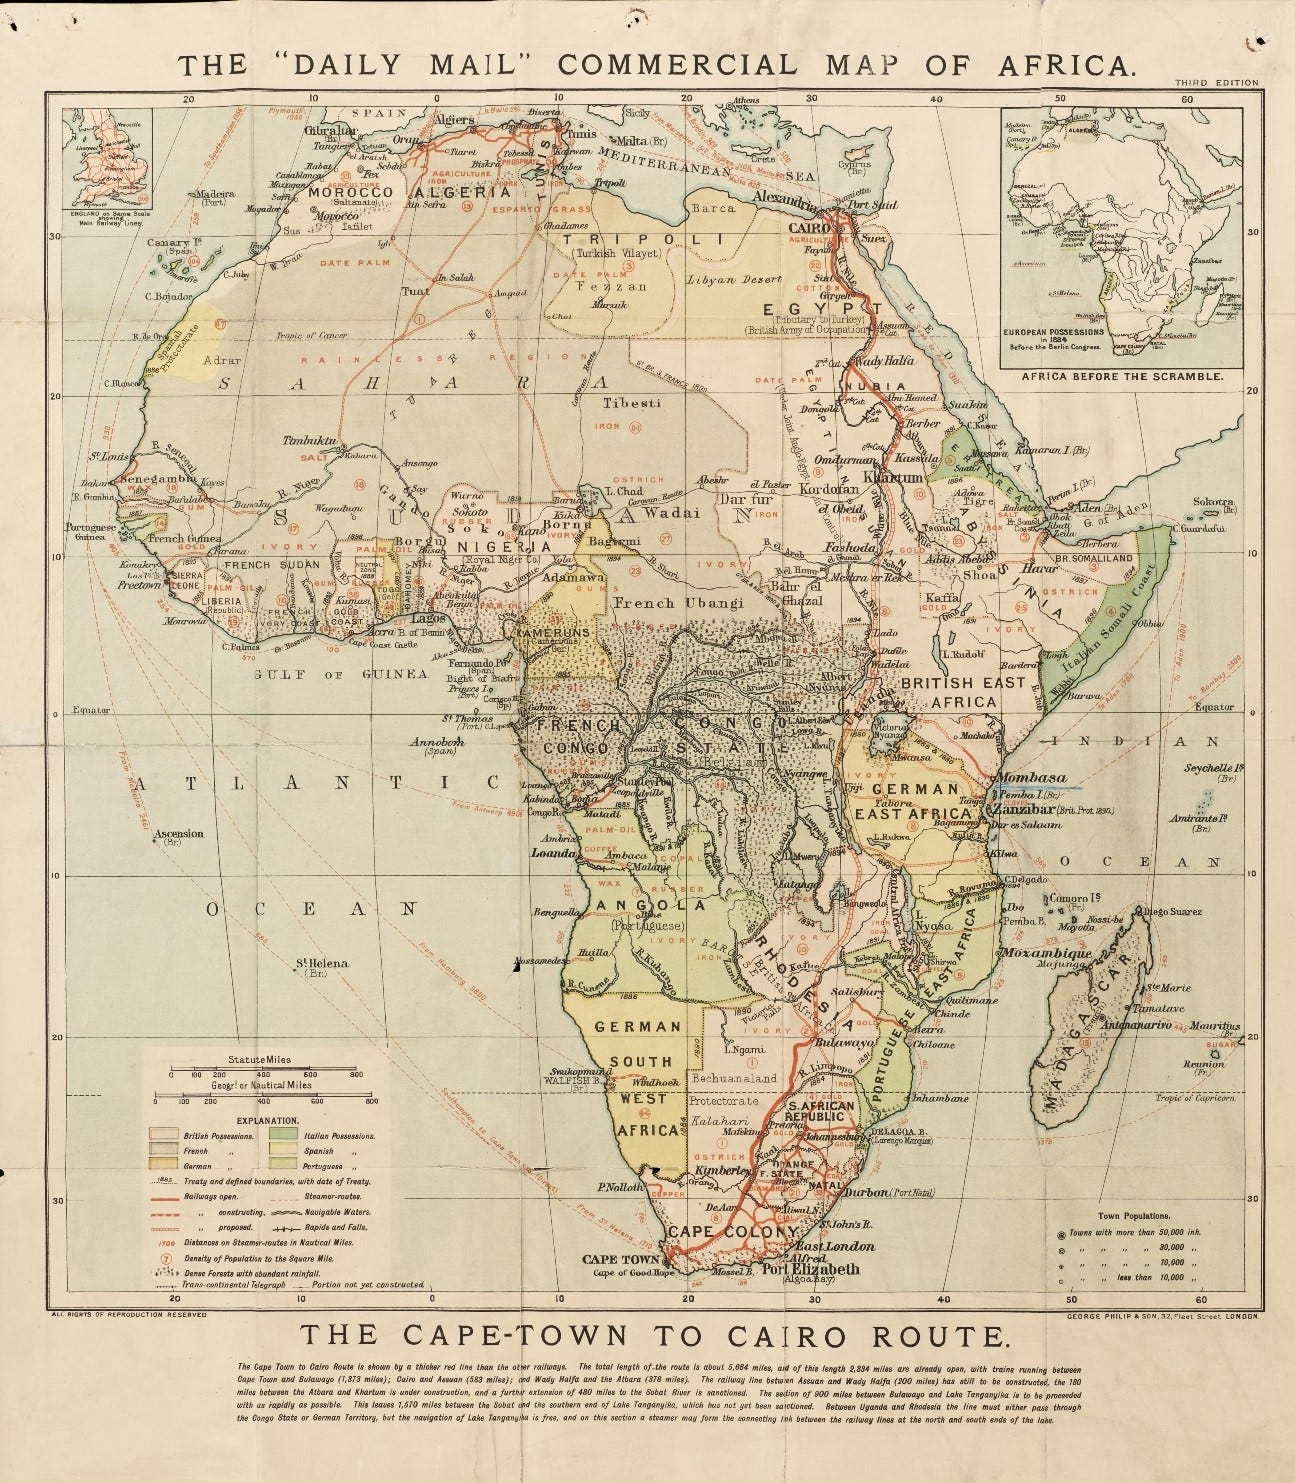 A coloured map of Africa showing land claimed by European nations including British, German, French and Portuguese possessions. Natural resources found in each region are also identified including ivory, palm oil, rubber, iron and copper. The partially completed Cape-town to Cairo railway route is also included.